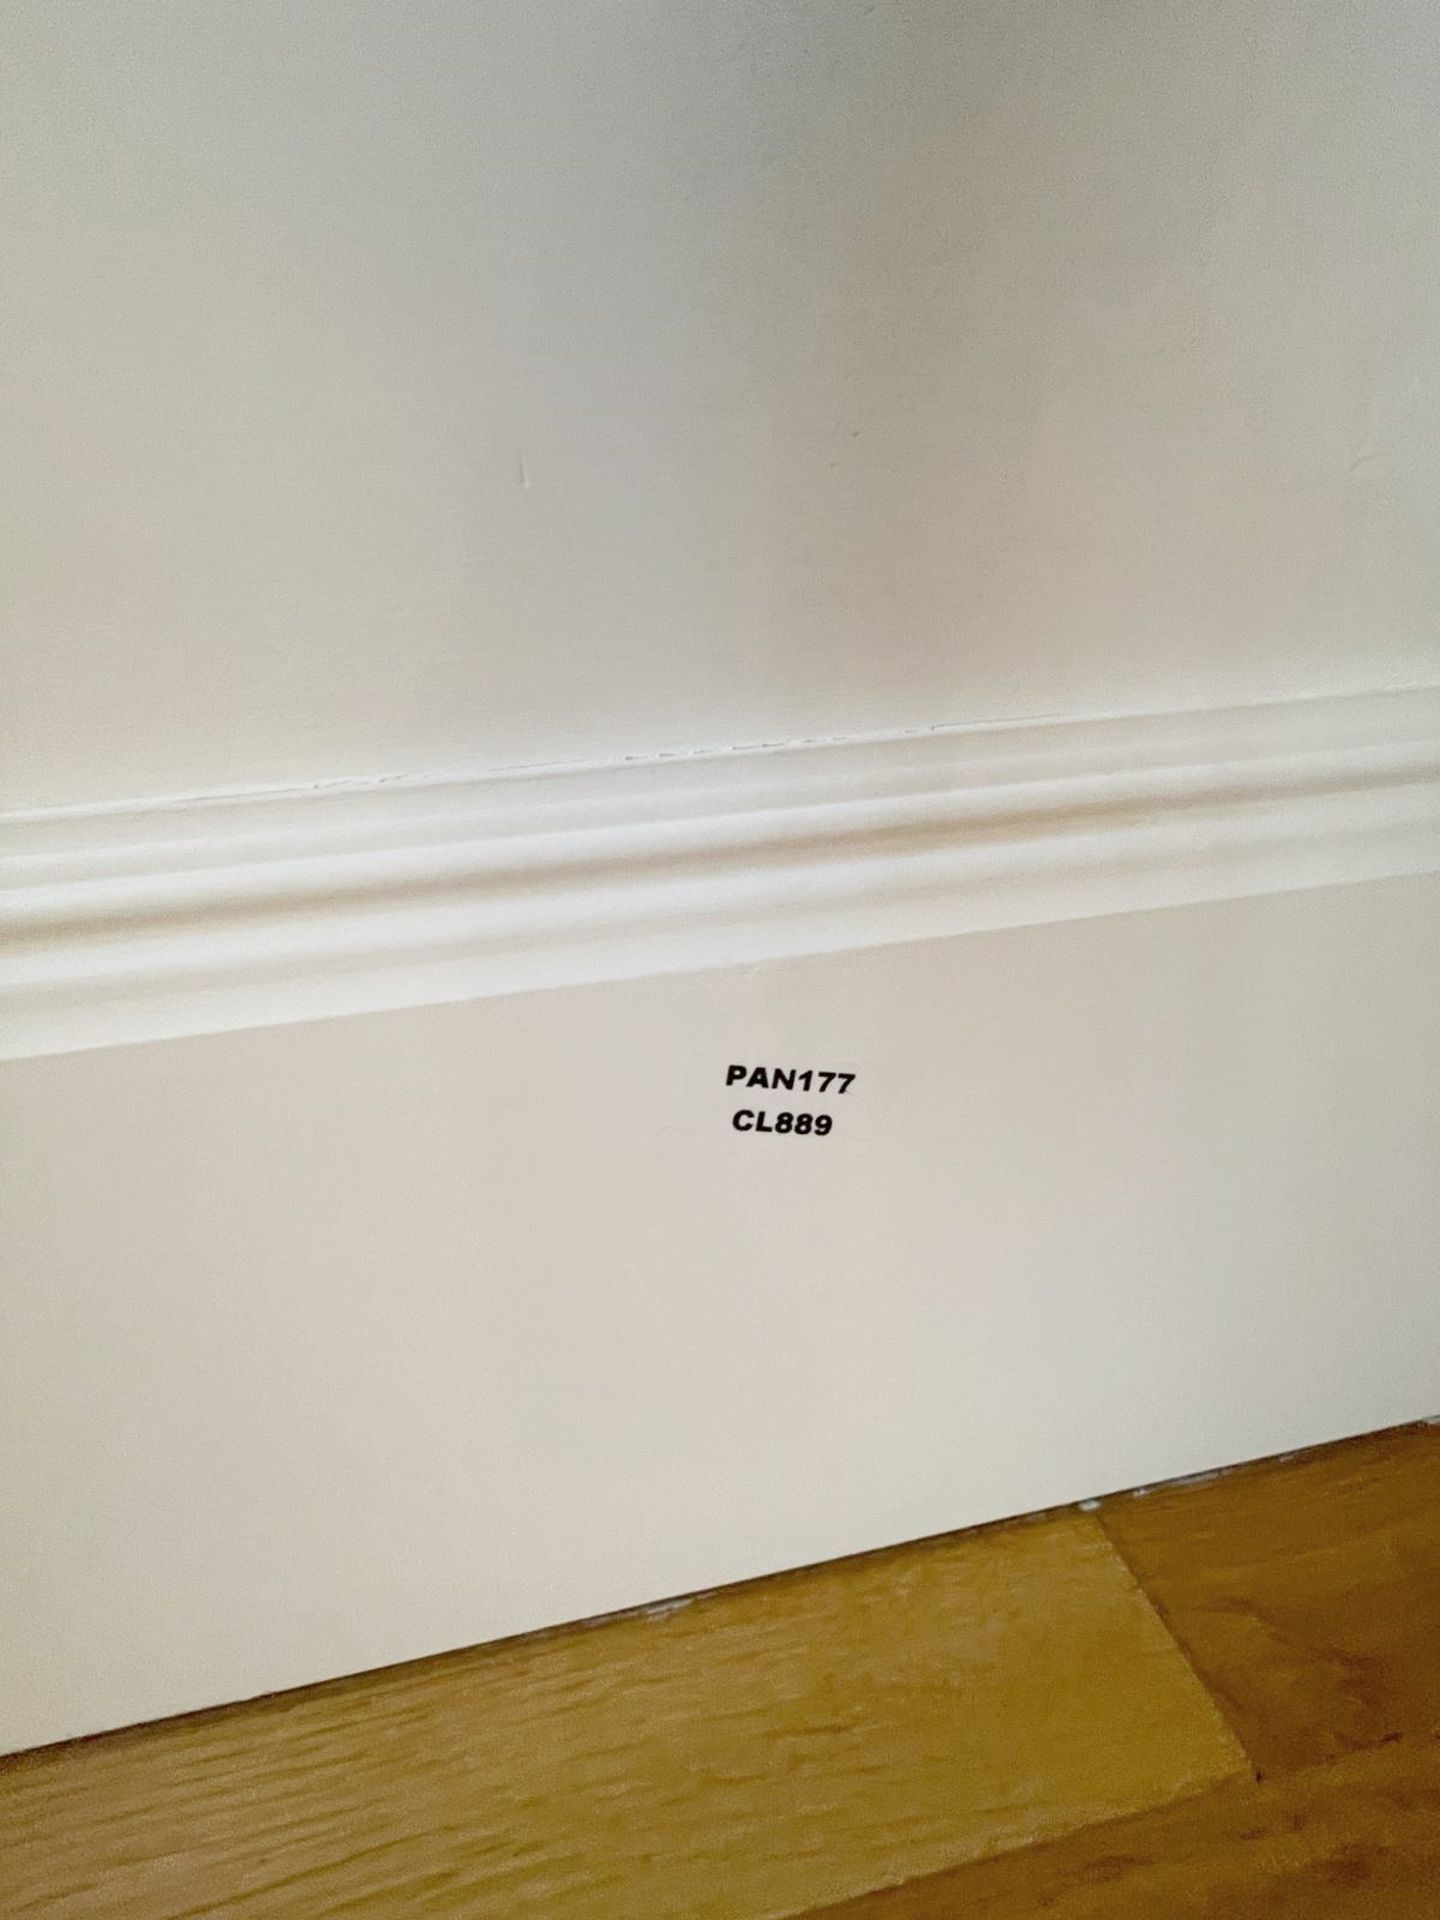 Approximately 17-metres of Timber Painted Skirting Boards in White, Height 23cm - Ref: PAN177 - Bild 6 aus 8